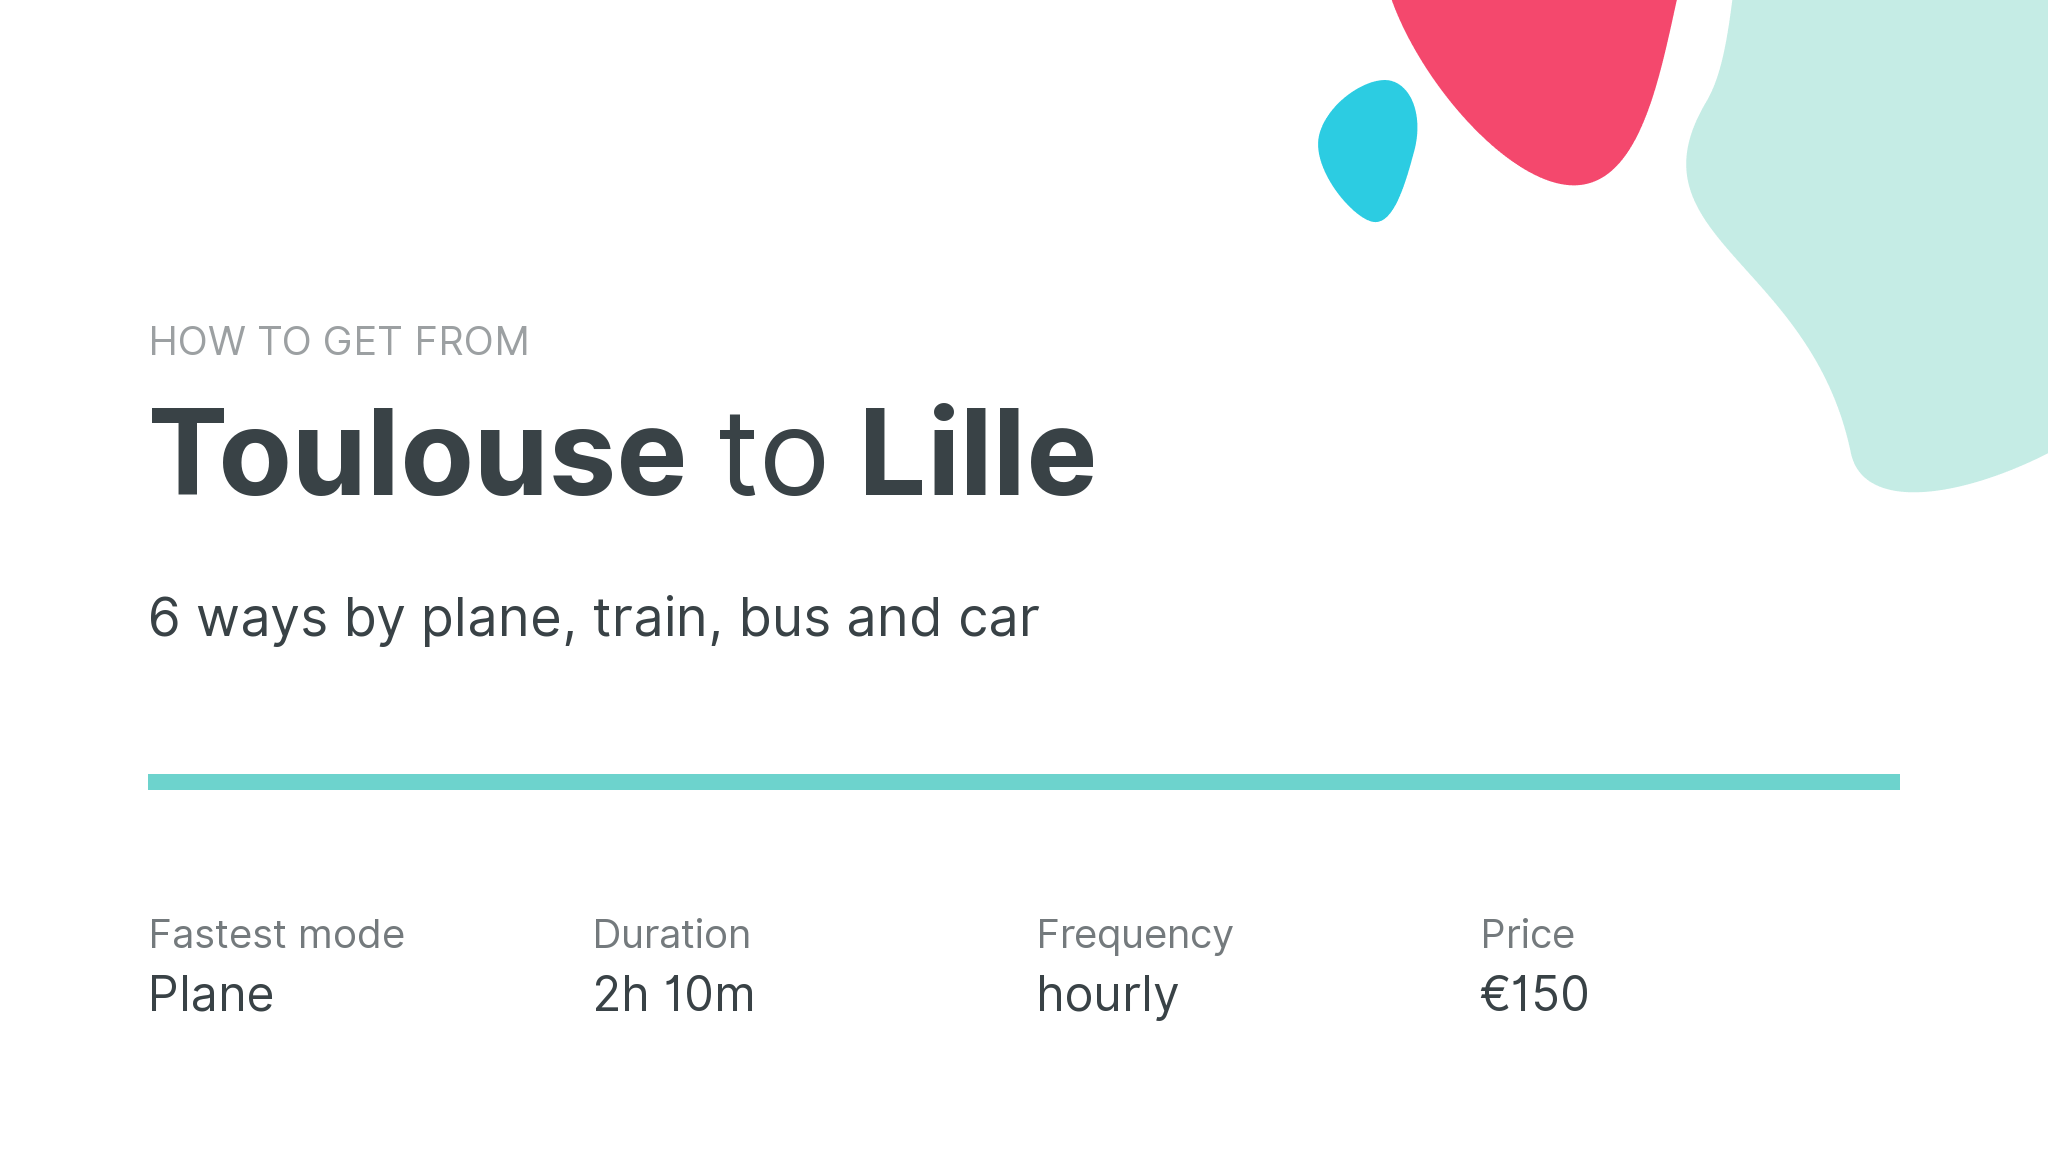 How do I get from Toulouse to Lille